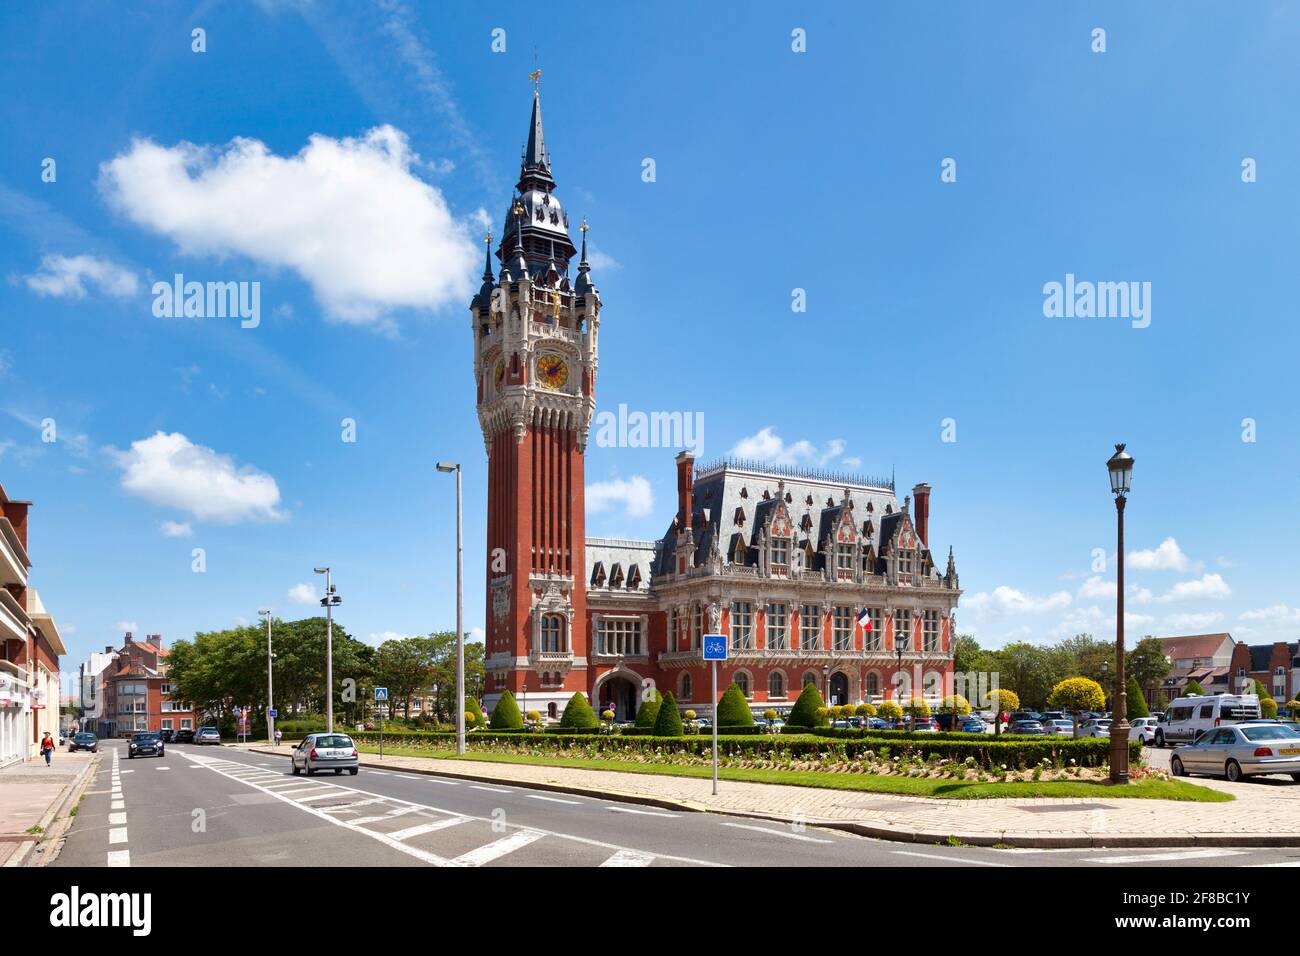 Calais, France - June 22 2020: The town hall is a building designed by the architect Louis Debrouwer, built from 1911 to 1923. Stock Photo